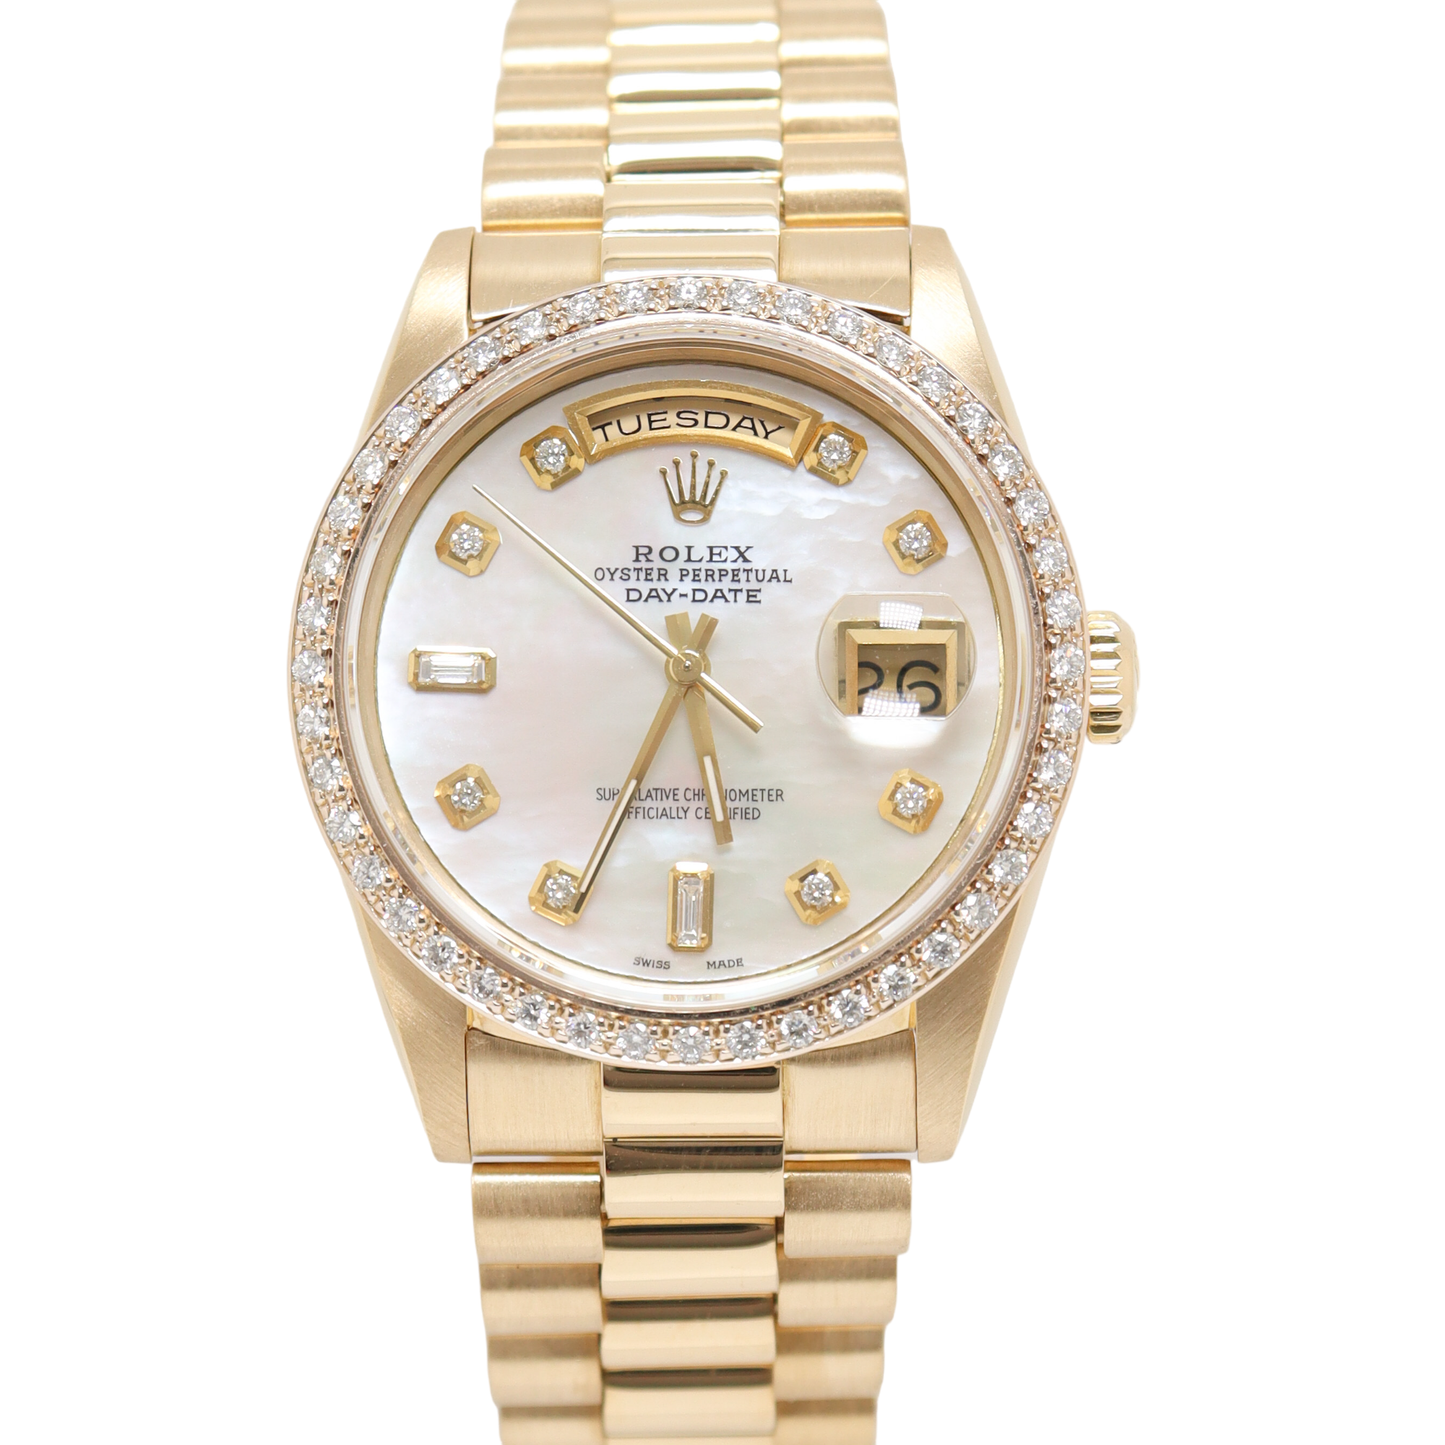 Load image into Gallery viewer, Rolex Daydate Yellow Gold 36mm White MOP Diamond Dial Watch Reference# 18238 - Happy Jewelers Fine Jewelry Lifetime Warranty
